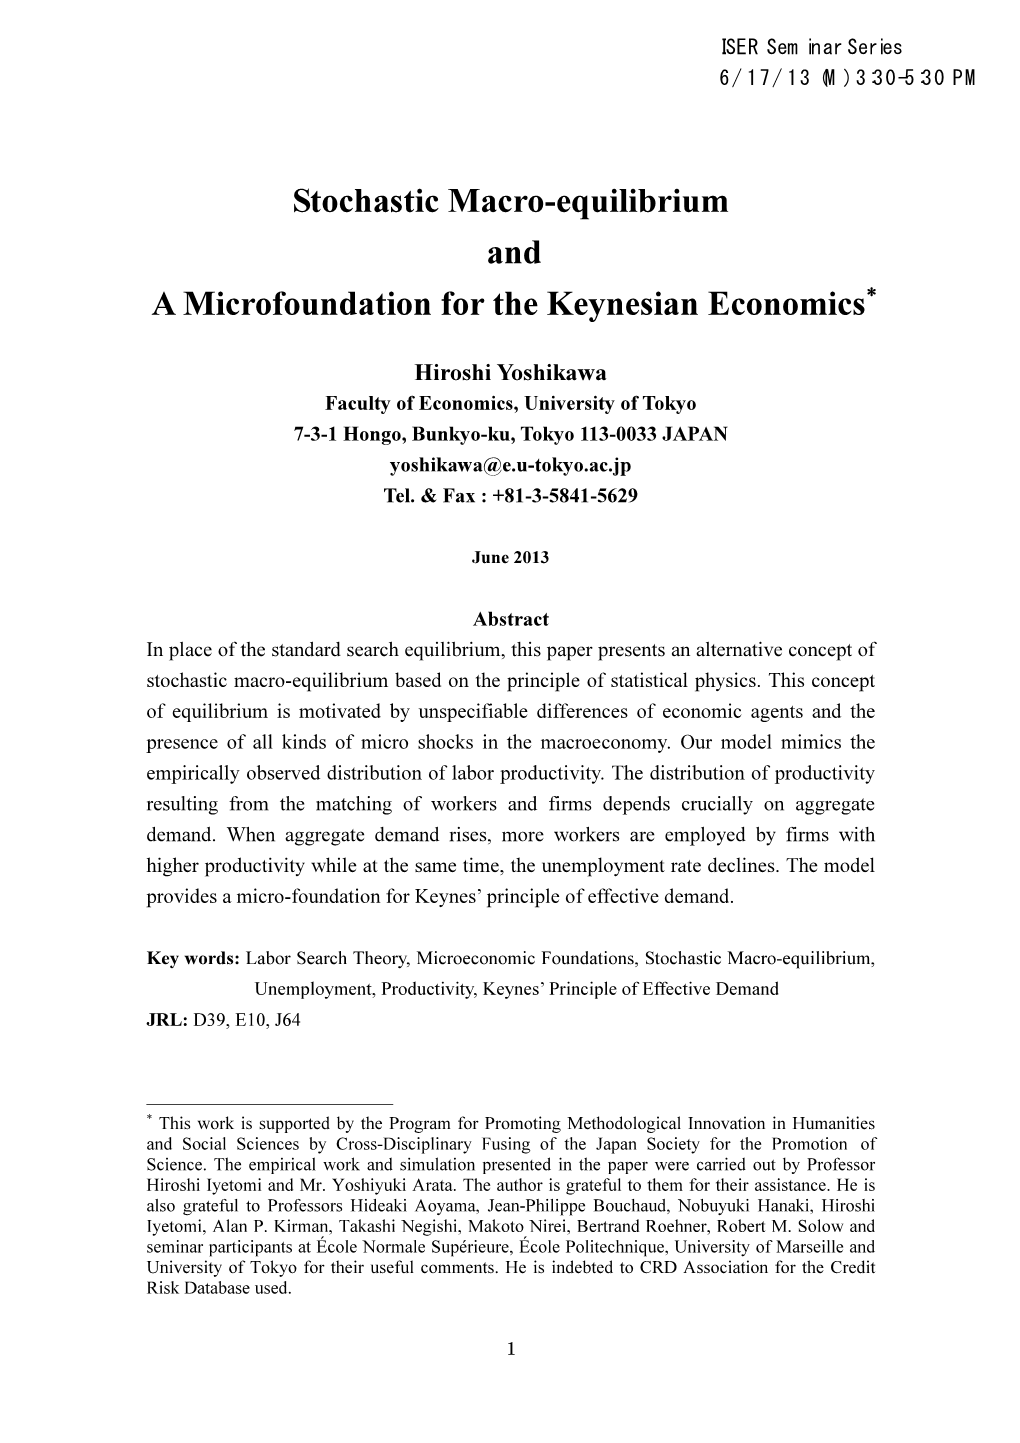 Stochastic Macro-Equilibrium and a Microfoundation for the Keynesian Economics∗